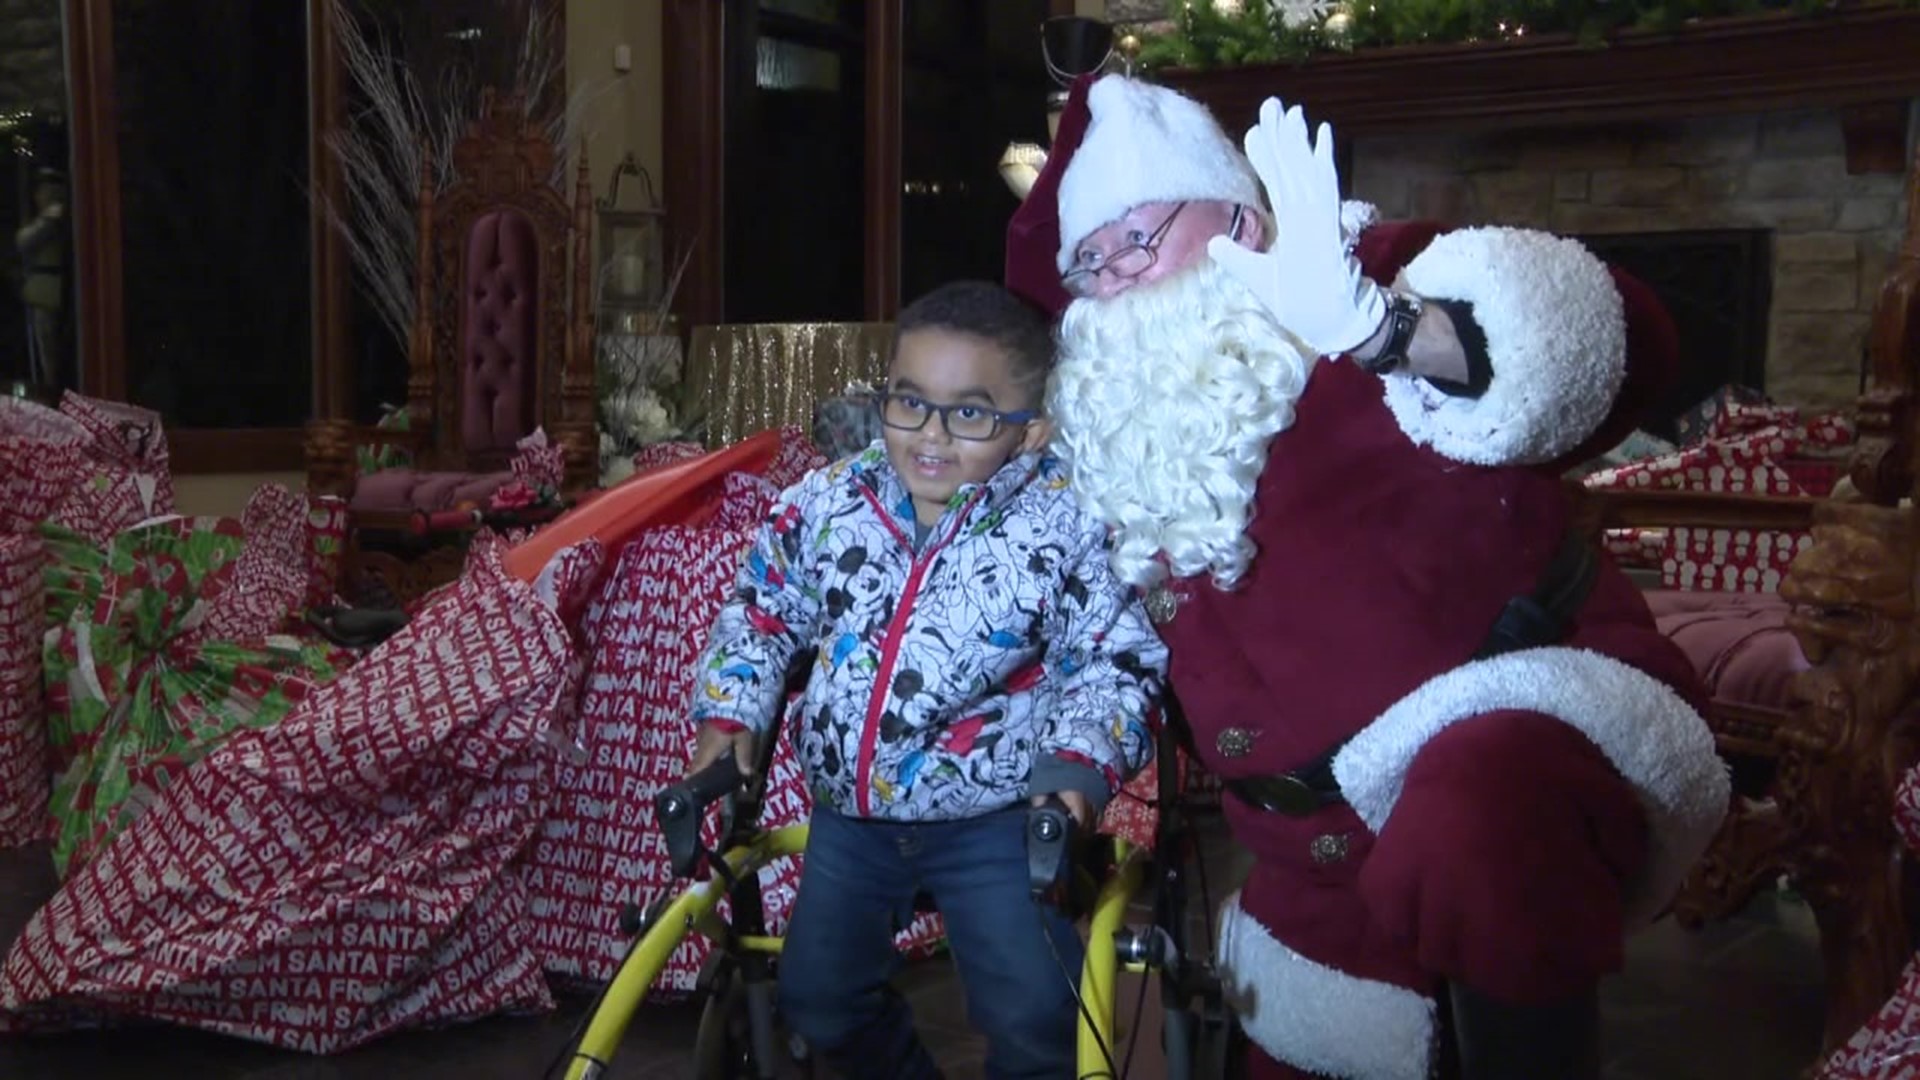 Santa dropped off gifts like bicycles and barbies to more than 100 kids at the annual Olsen Christmas Wish Event.